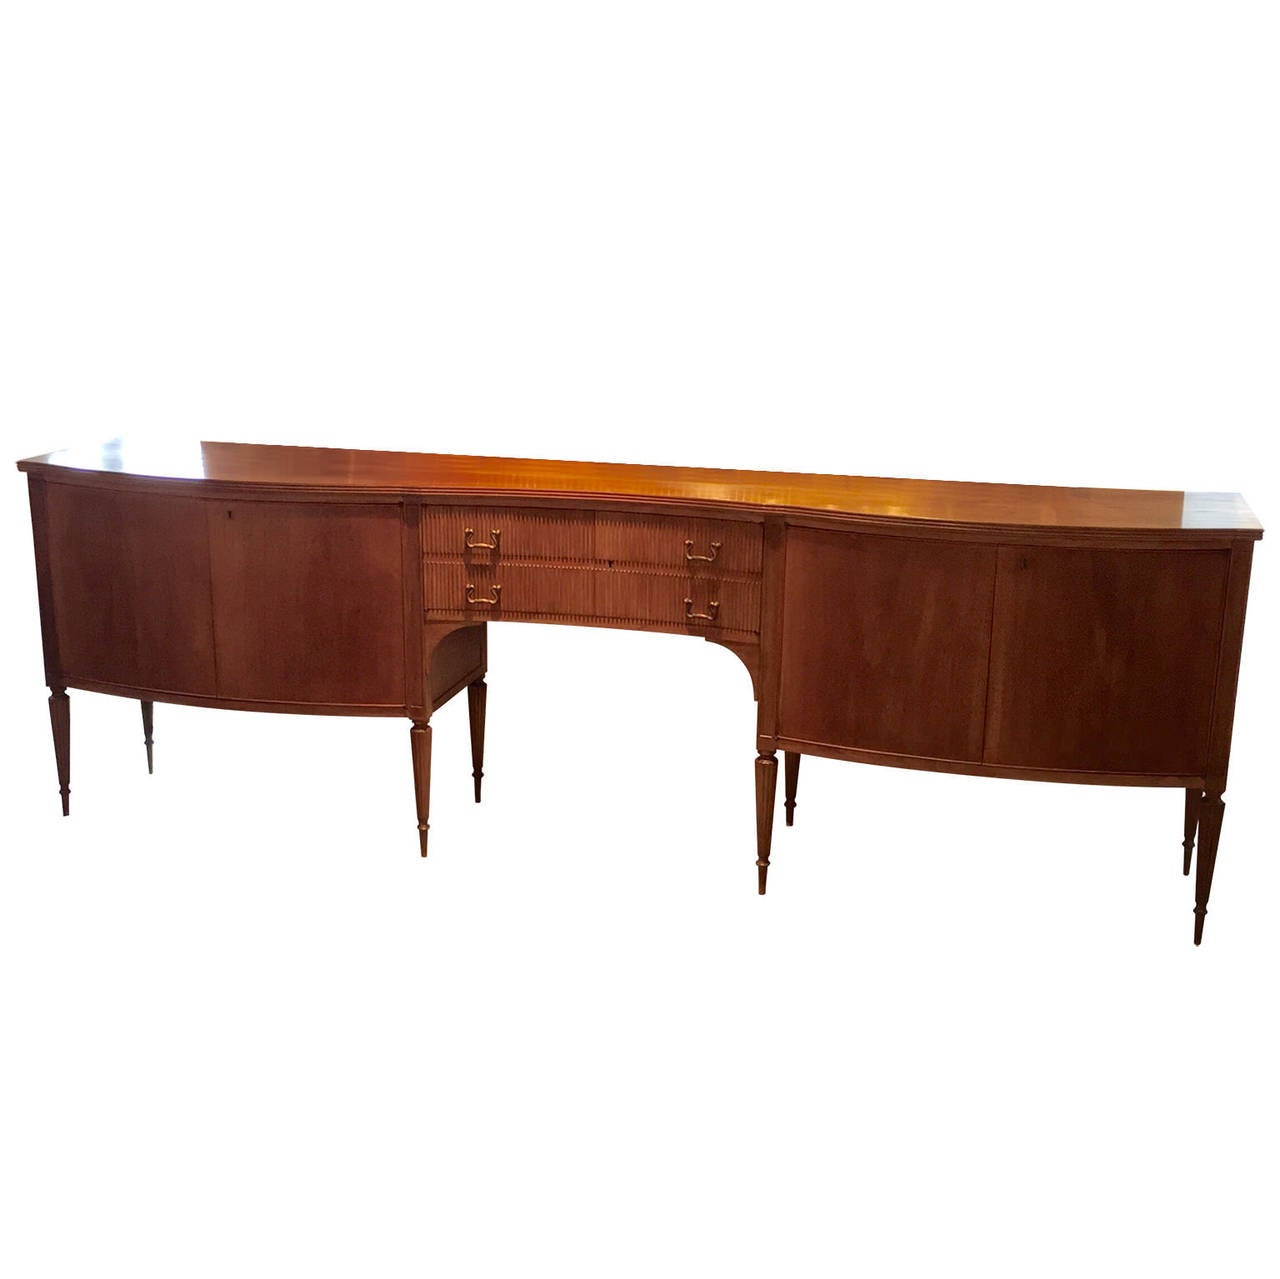 This sideboard is truly representative of MCM Italian design with its seductive curves, grounded in the efficient use of materials and intelligent manufacturing. In examining pieces designed by Milanese architect and designer Paola Buffa, one is